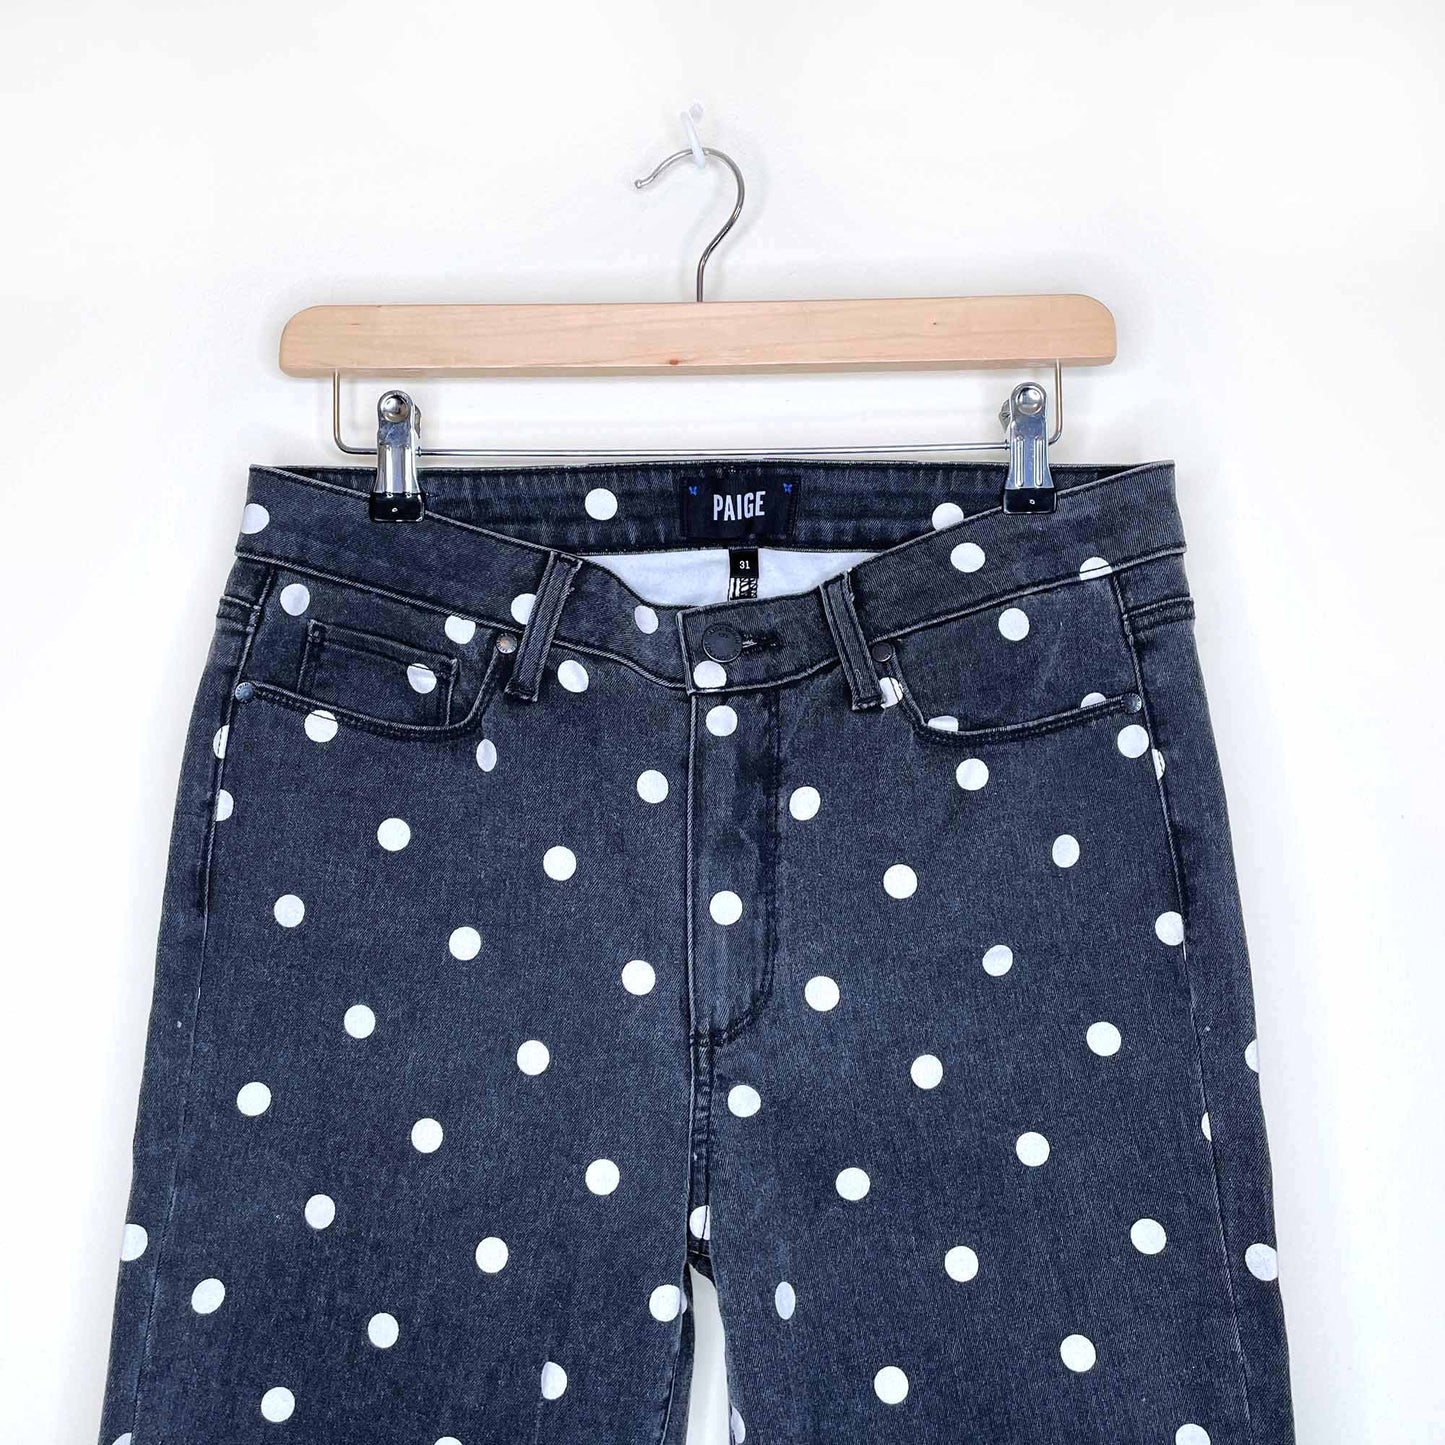 paige polka dot hoxton mid rise ultra skinny jeans - size 31